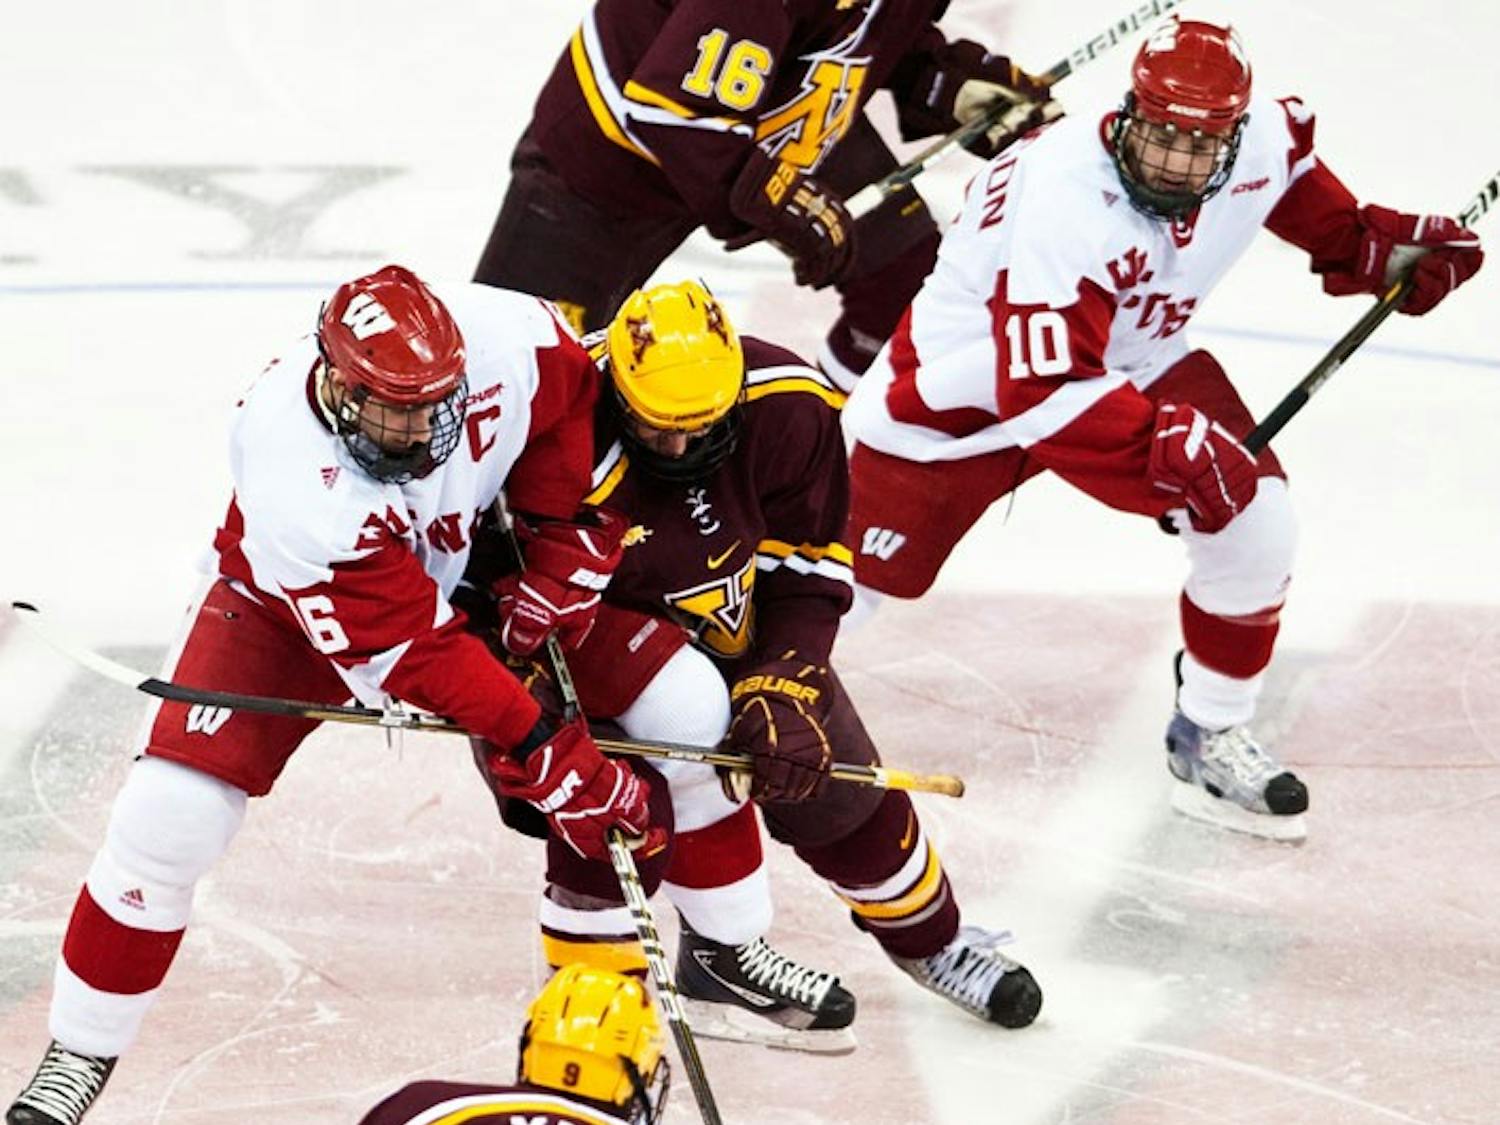 Puck to drop for six-team Big Ten hockey conference in 2013-14